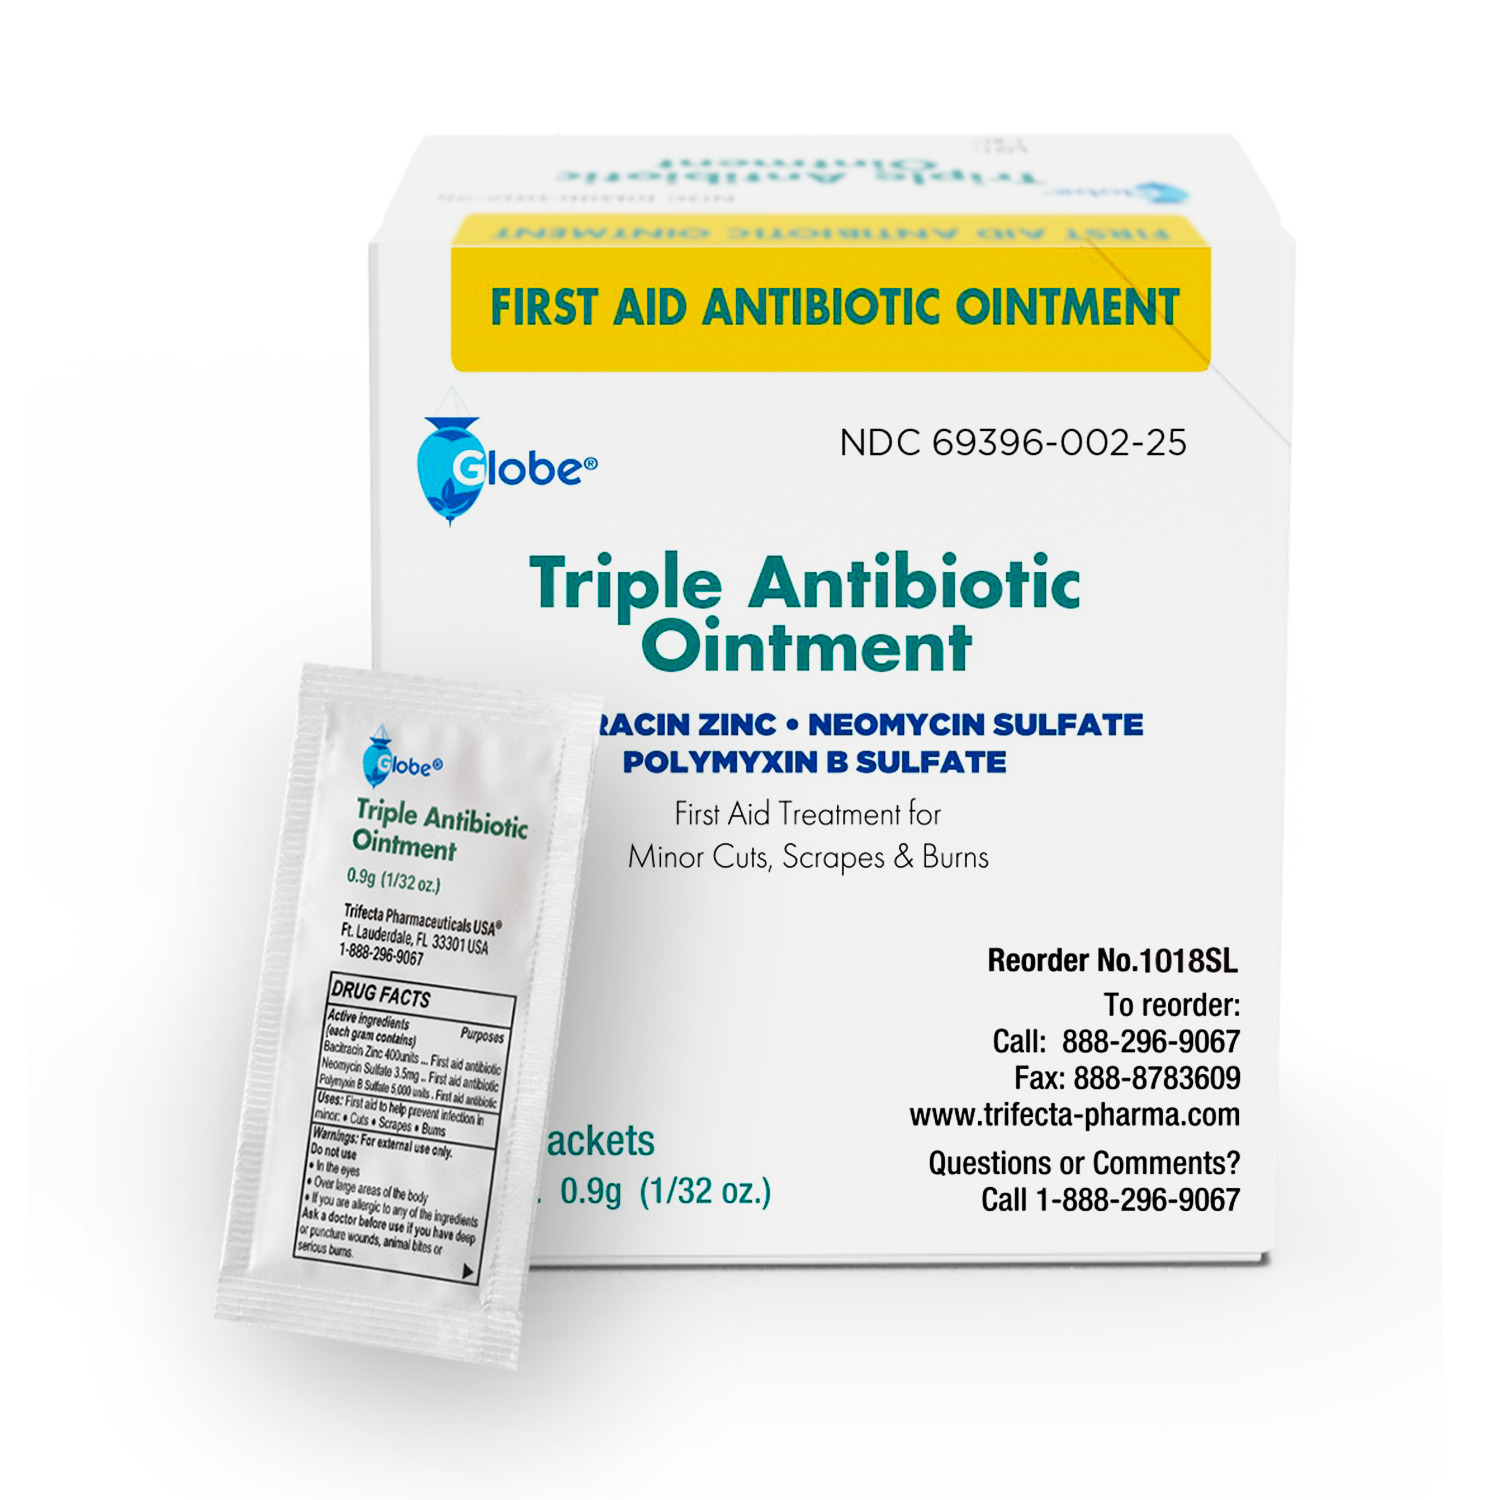 Globe Triple Antibiotic Ointment 0.9g Single Packets. (25 Packets per Box)